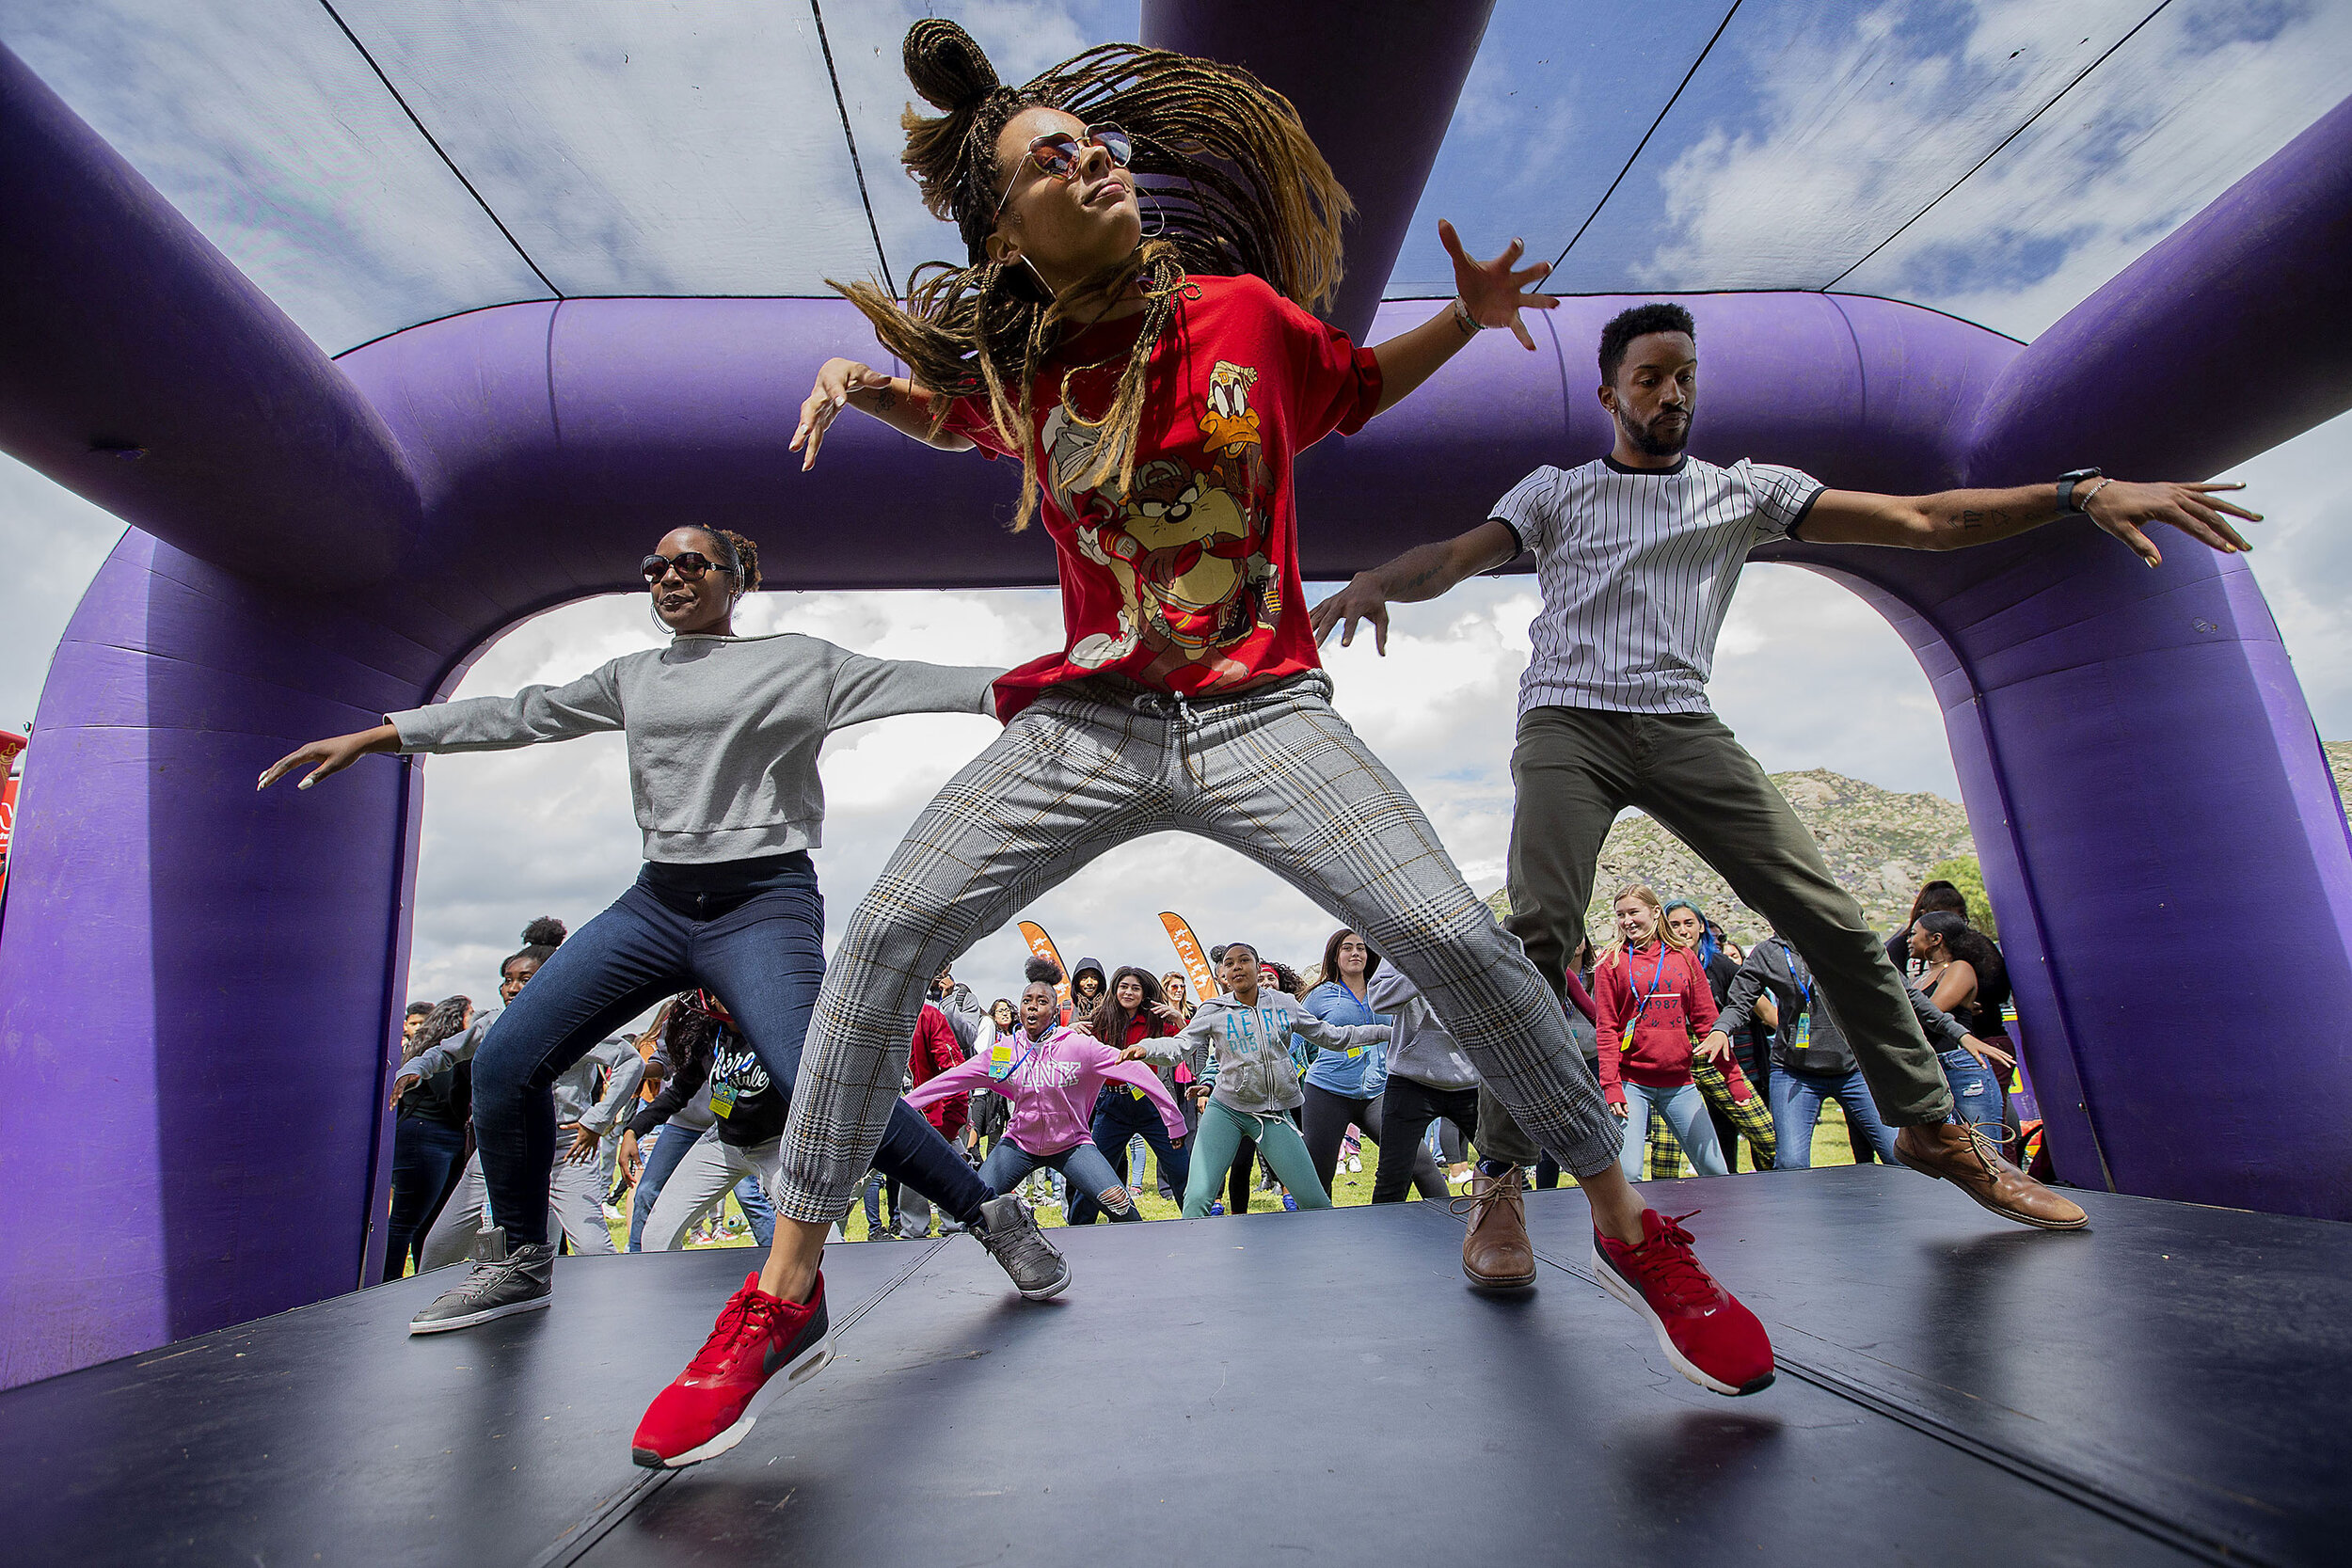  Takis Dancer Liz Legrande, center teaches steps to members of Rancho Verde High's Mustang Dance Company during High School Nation, a music festival tour at Rancho Verde High in Moreno Valley on Wednesday, March 20, 2019.  